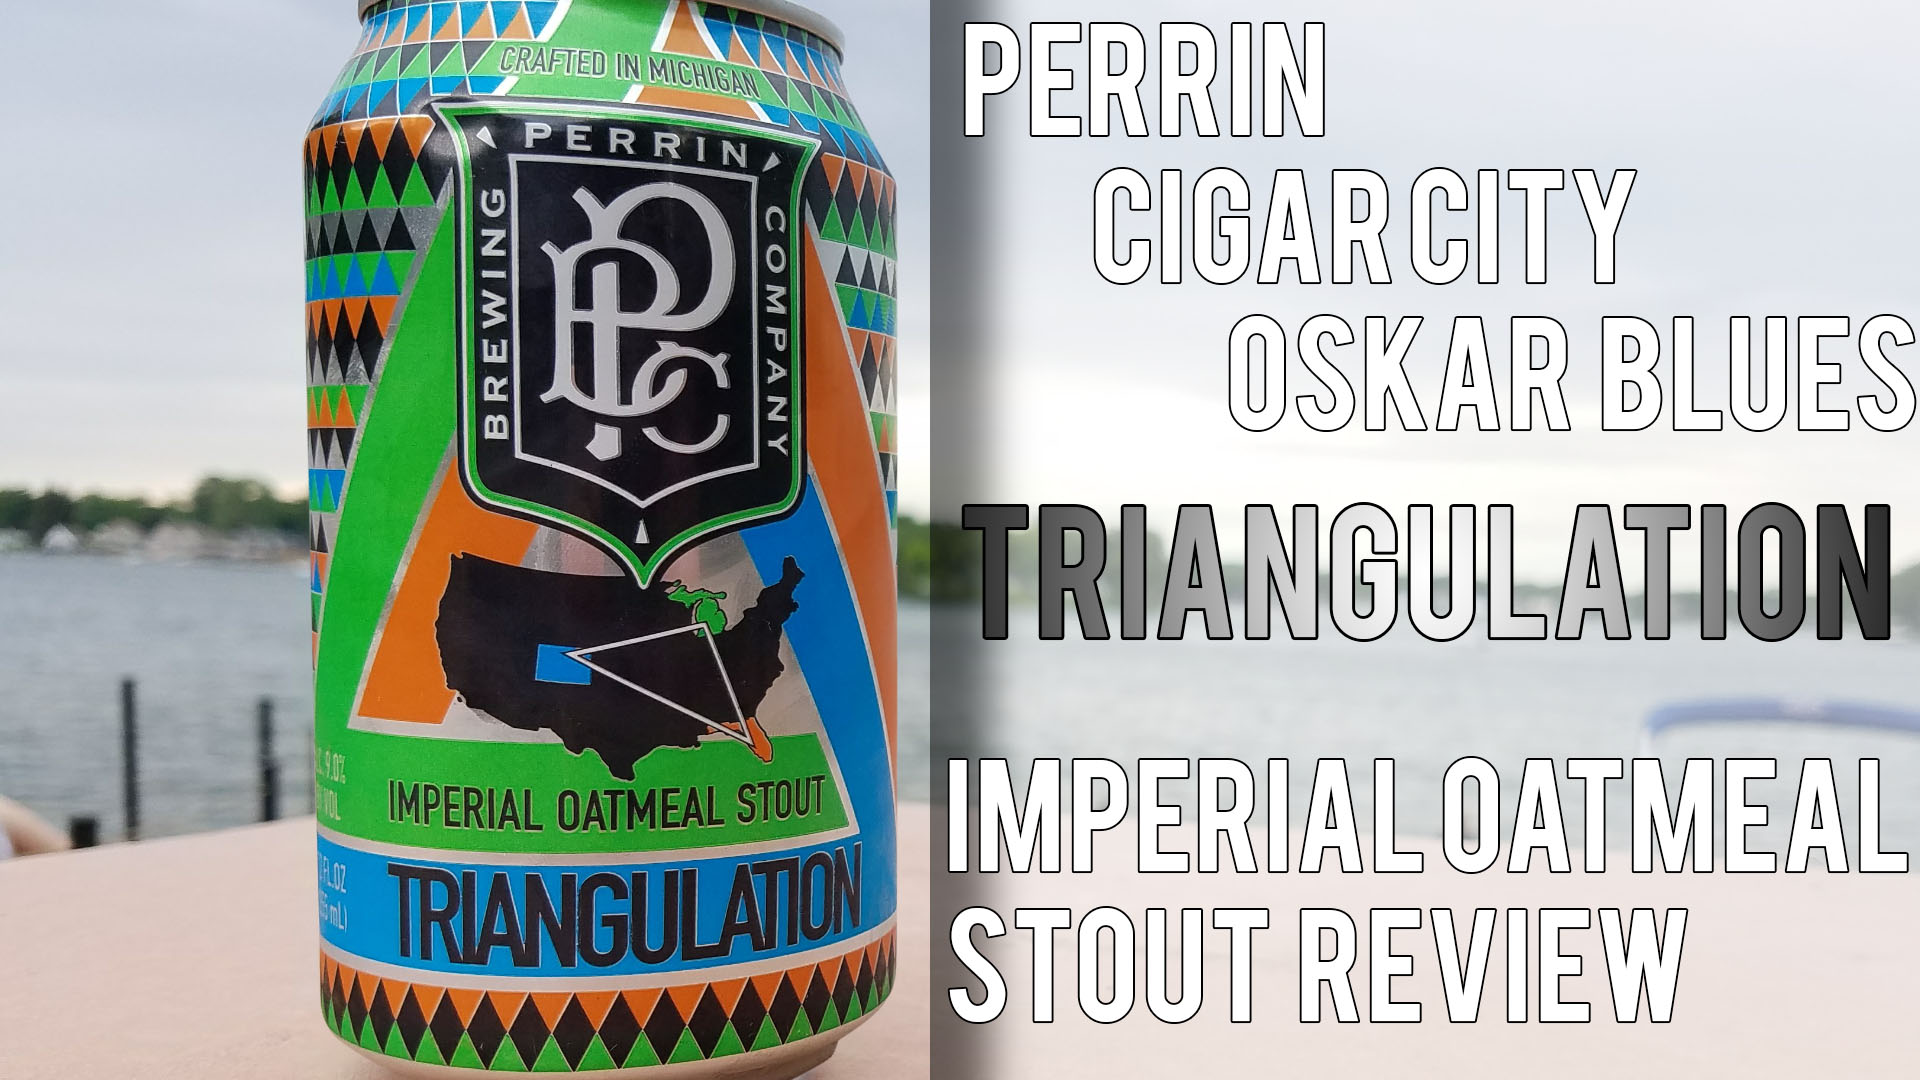 You are currently viewing Perrin Brewing Company’s Triangulation Imperial Oatmeal Stout